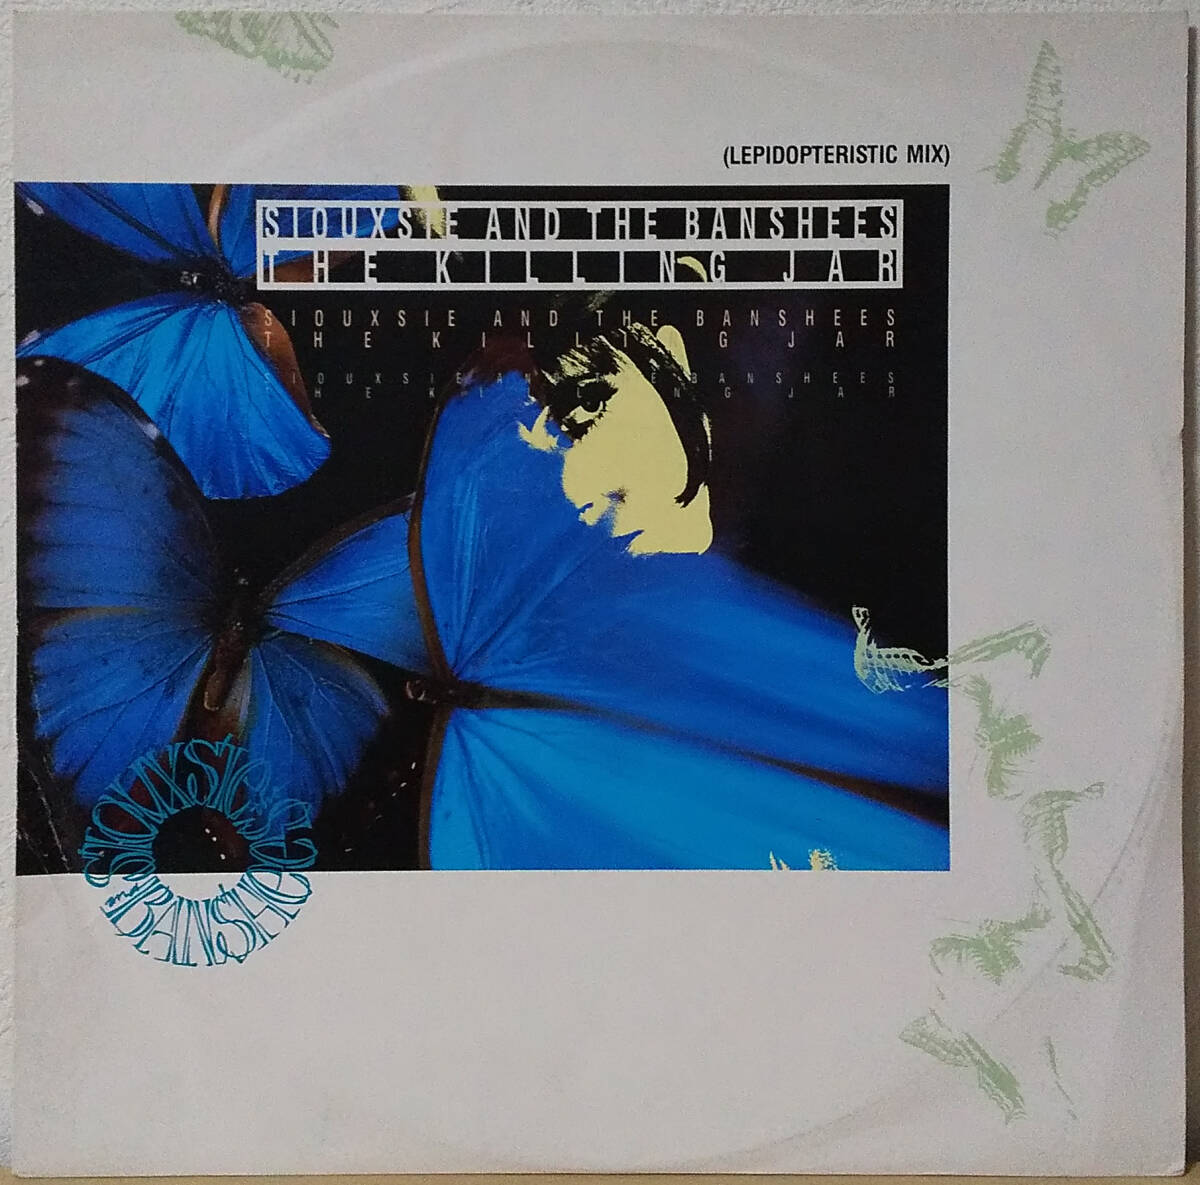 Siouxsie And The Banshees - The Killing Jar (Lepidopteristic Mix) UK 12inch Wonderland - SHEX 15 スージー＆ザ・バンシーズ 1988年_画像1